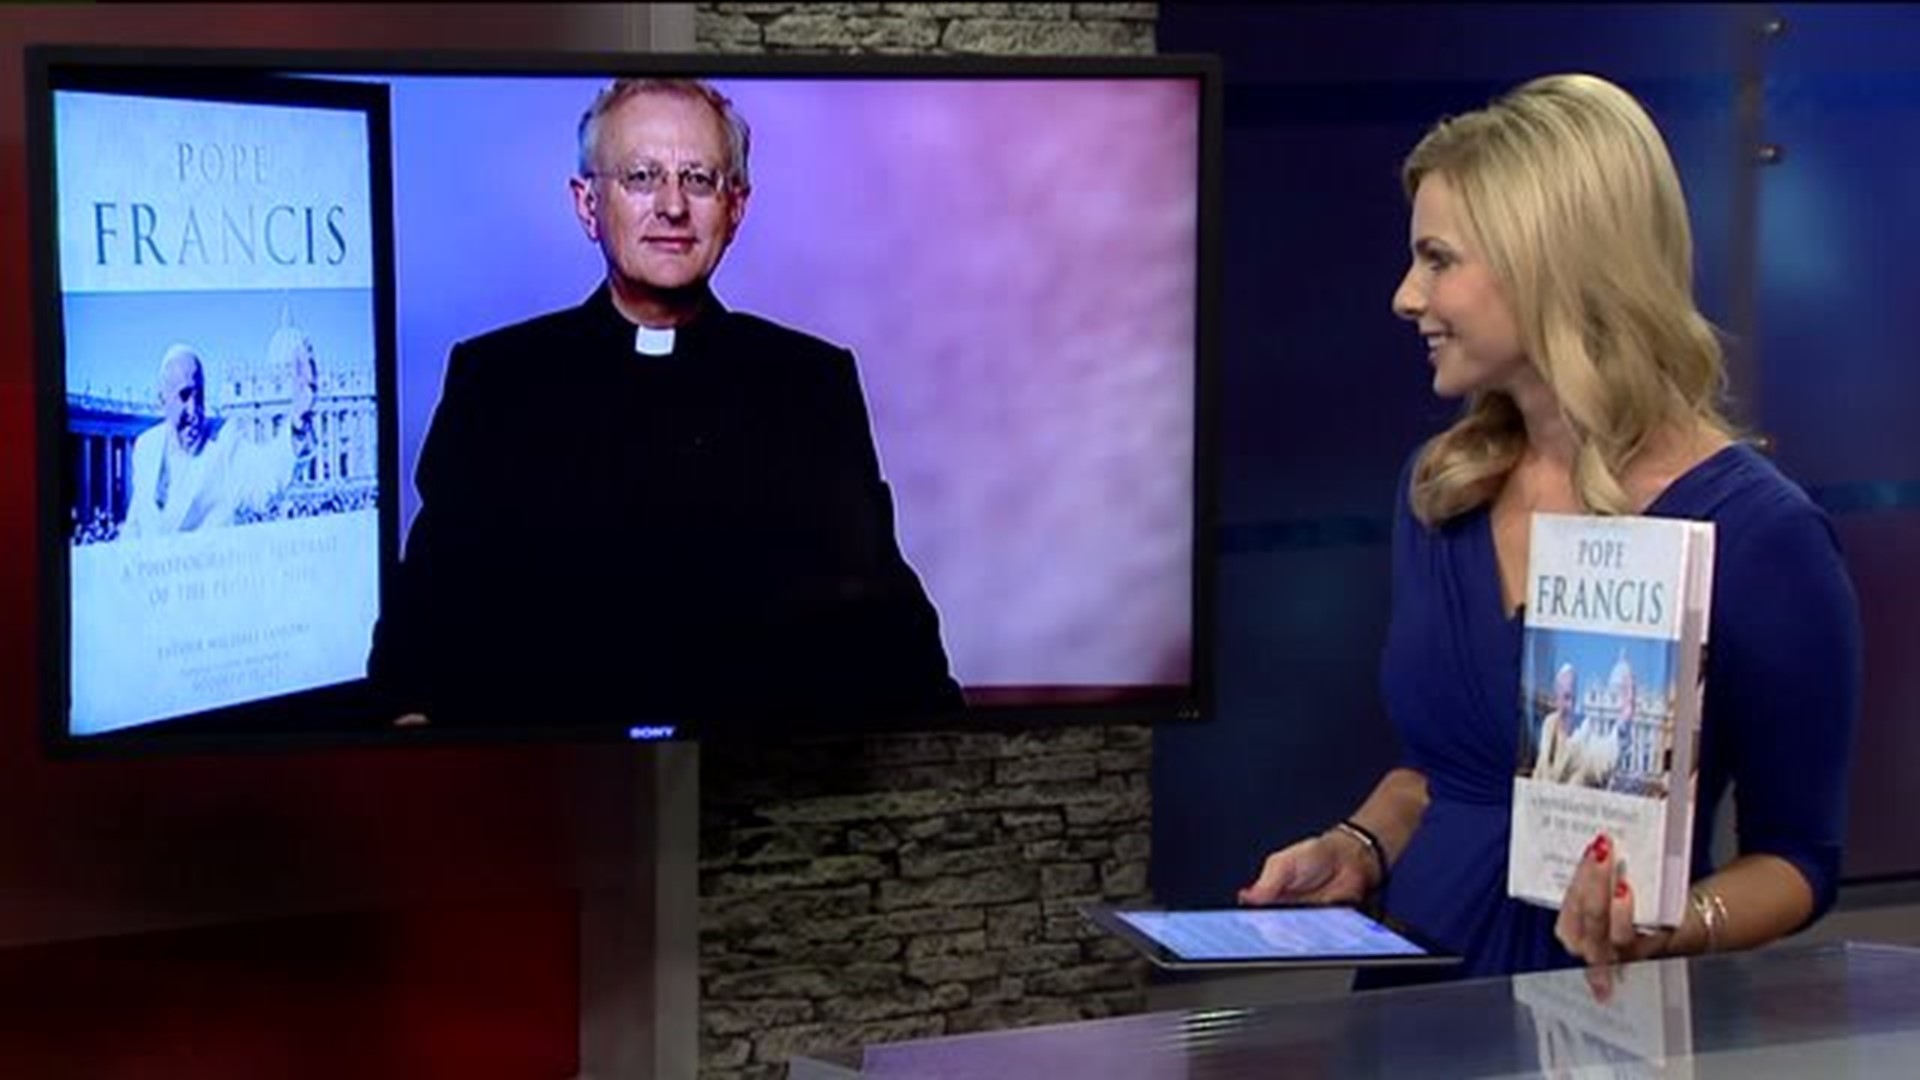 Author talks about how his new book paints a portrait of Pope Francis